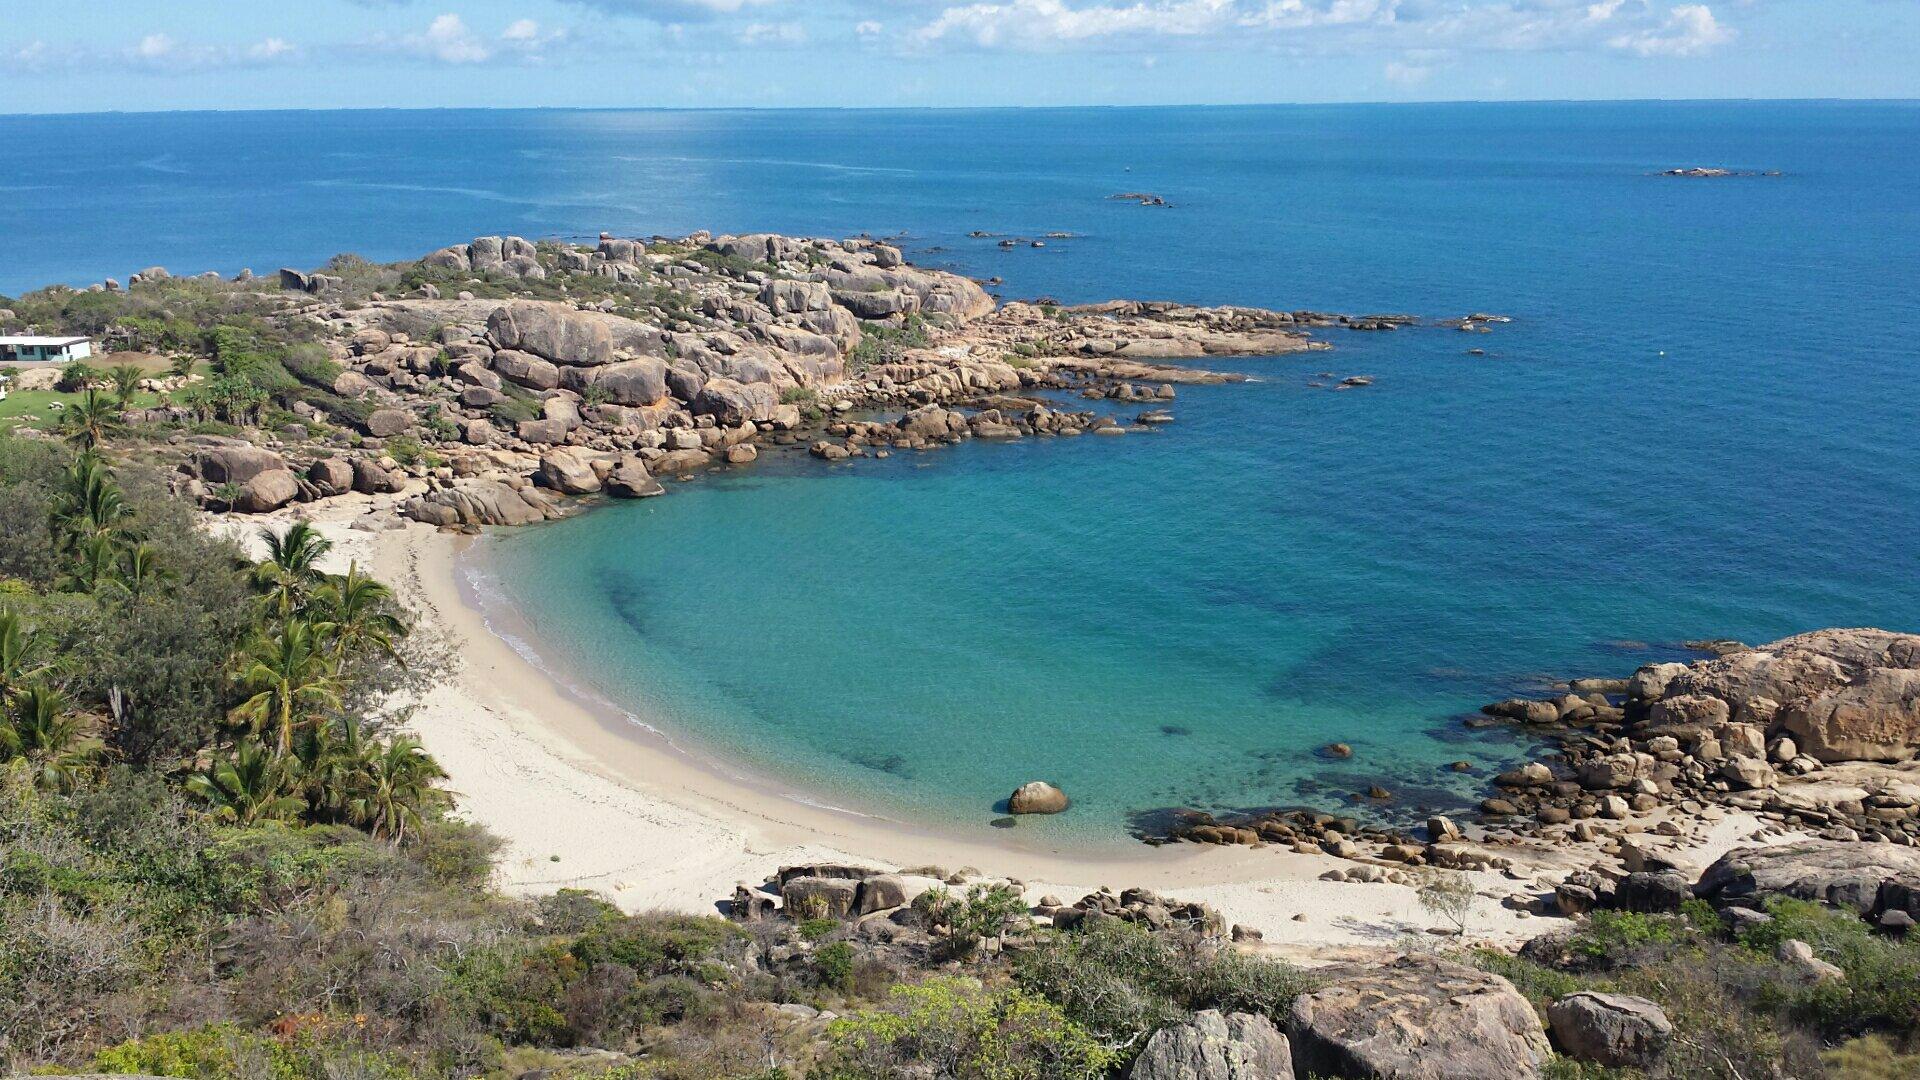 THE 15 BEST Things to Do in Bowen - 2023 (with Photos) - Tripadvisor